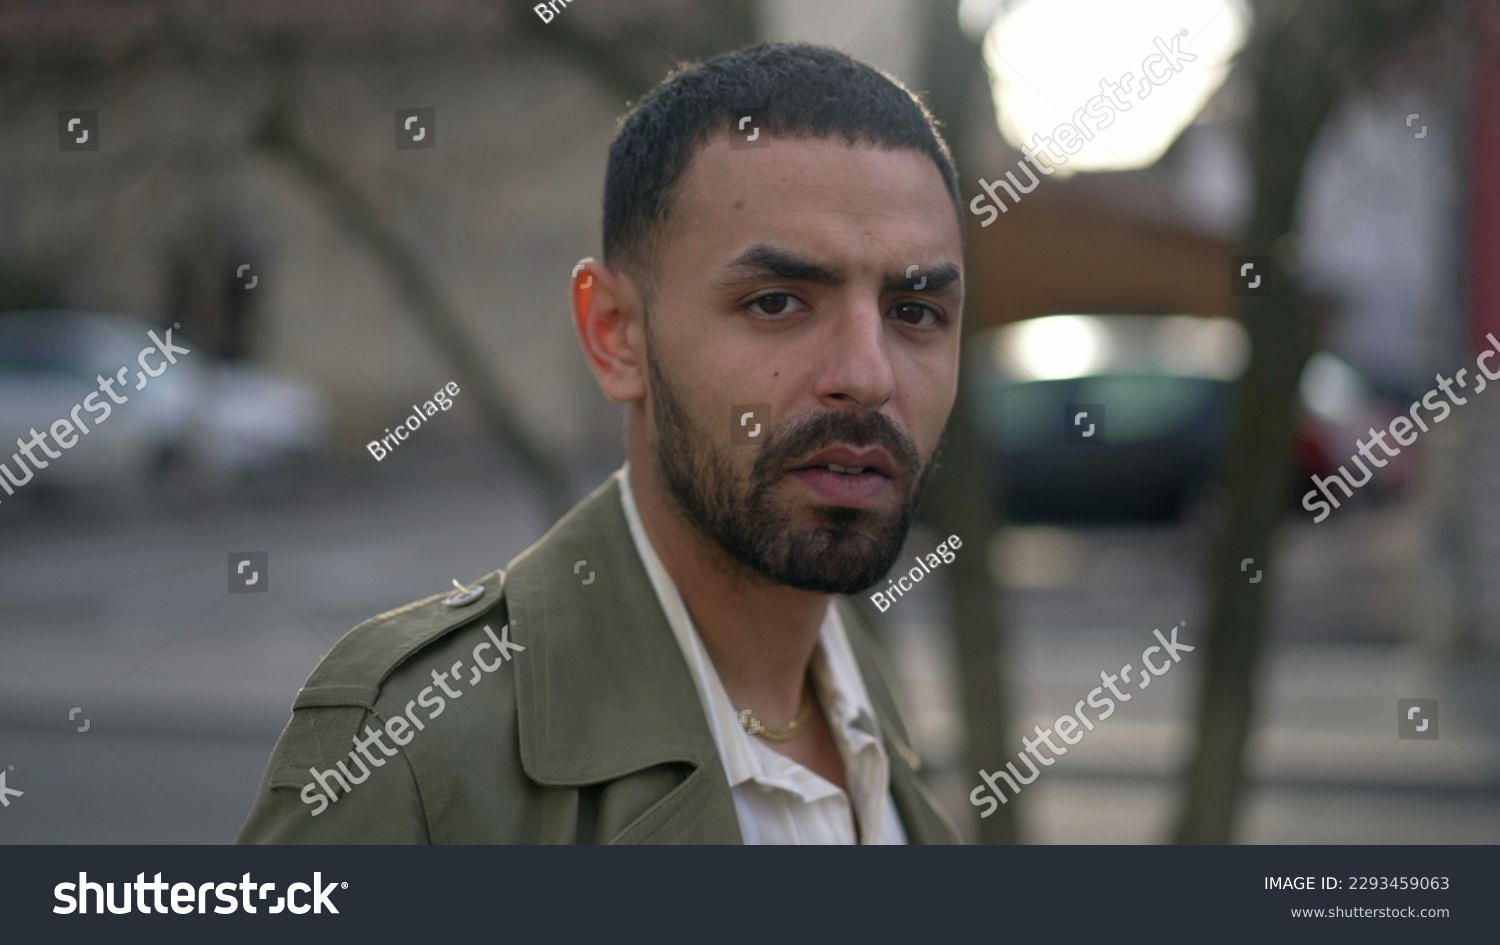 Portrait face of a Middle Eastern young man with serious expression staring at camera #2293459063